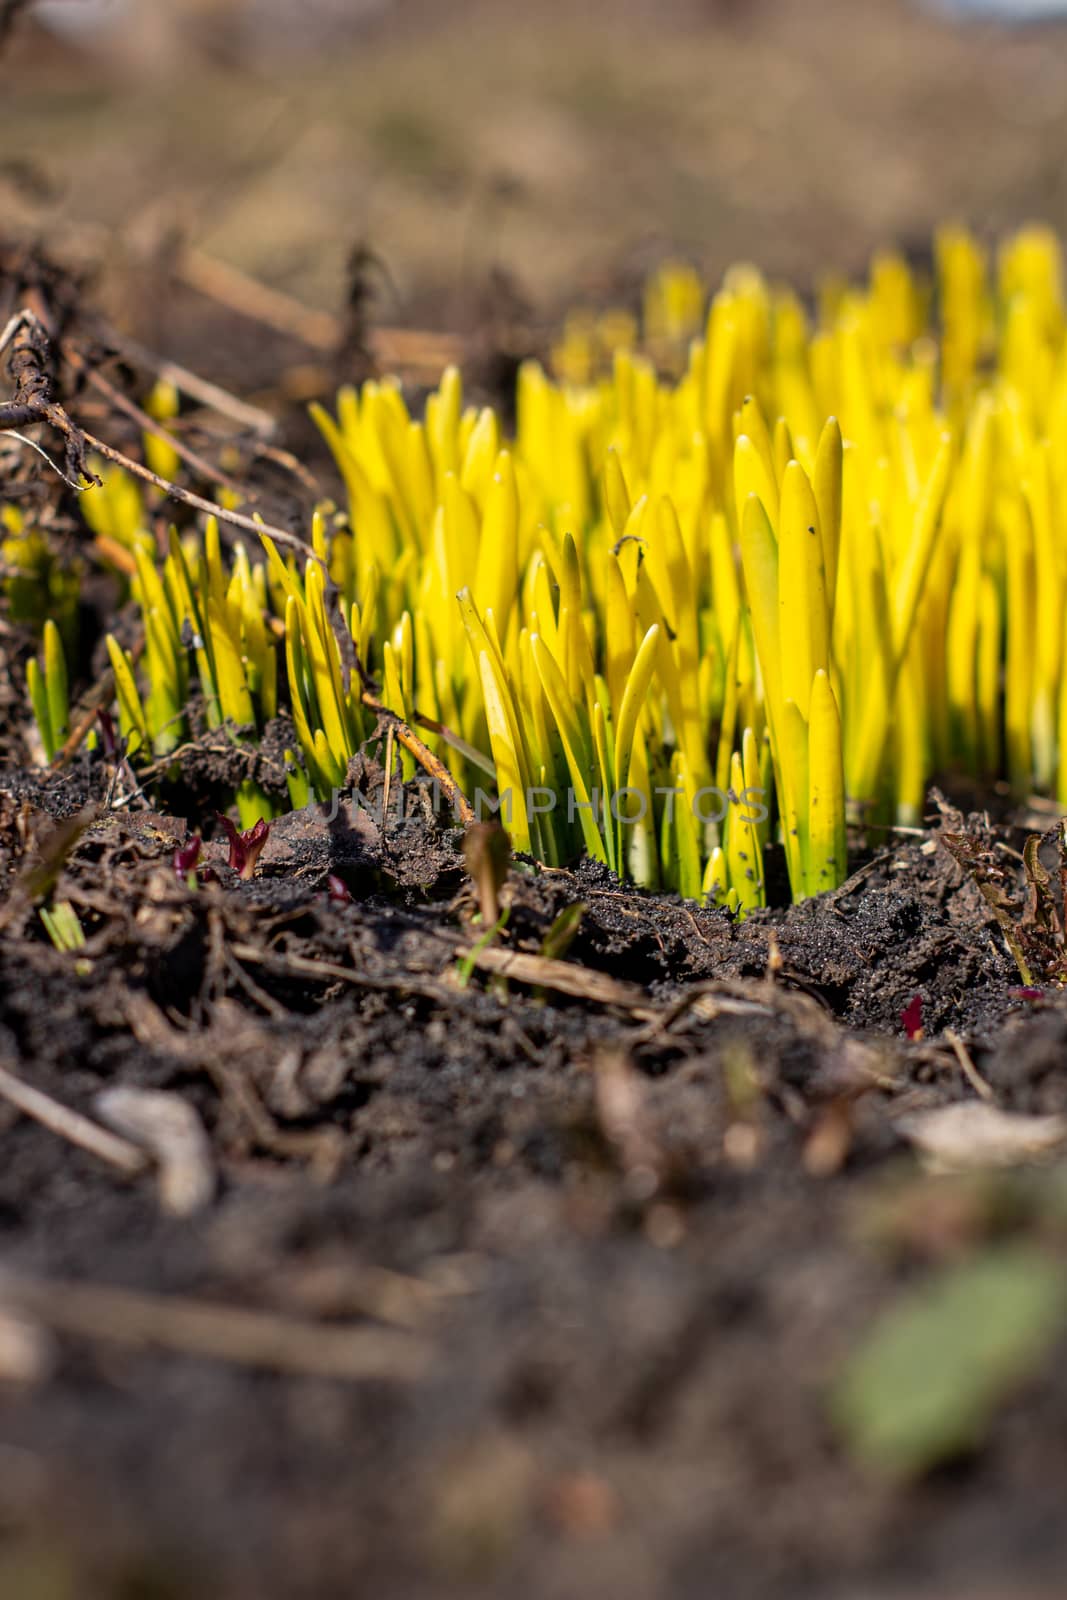 The green shoots of Daffodils in the spring. Daffodils sprout through the ground in spring.